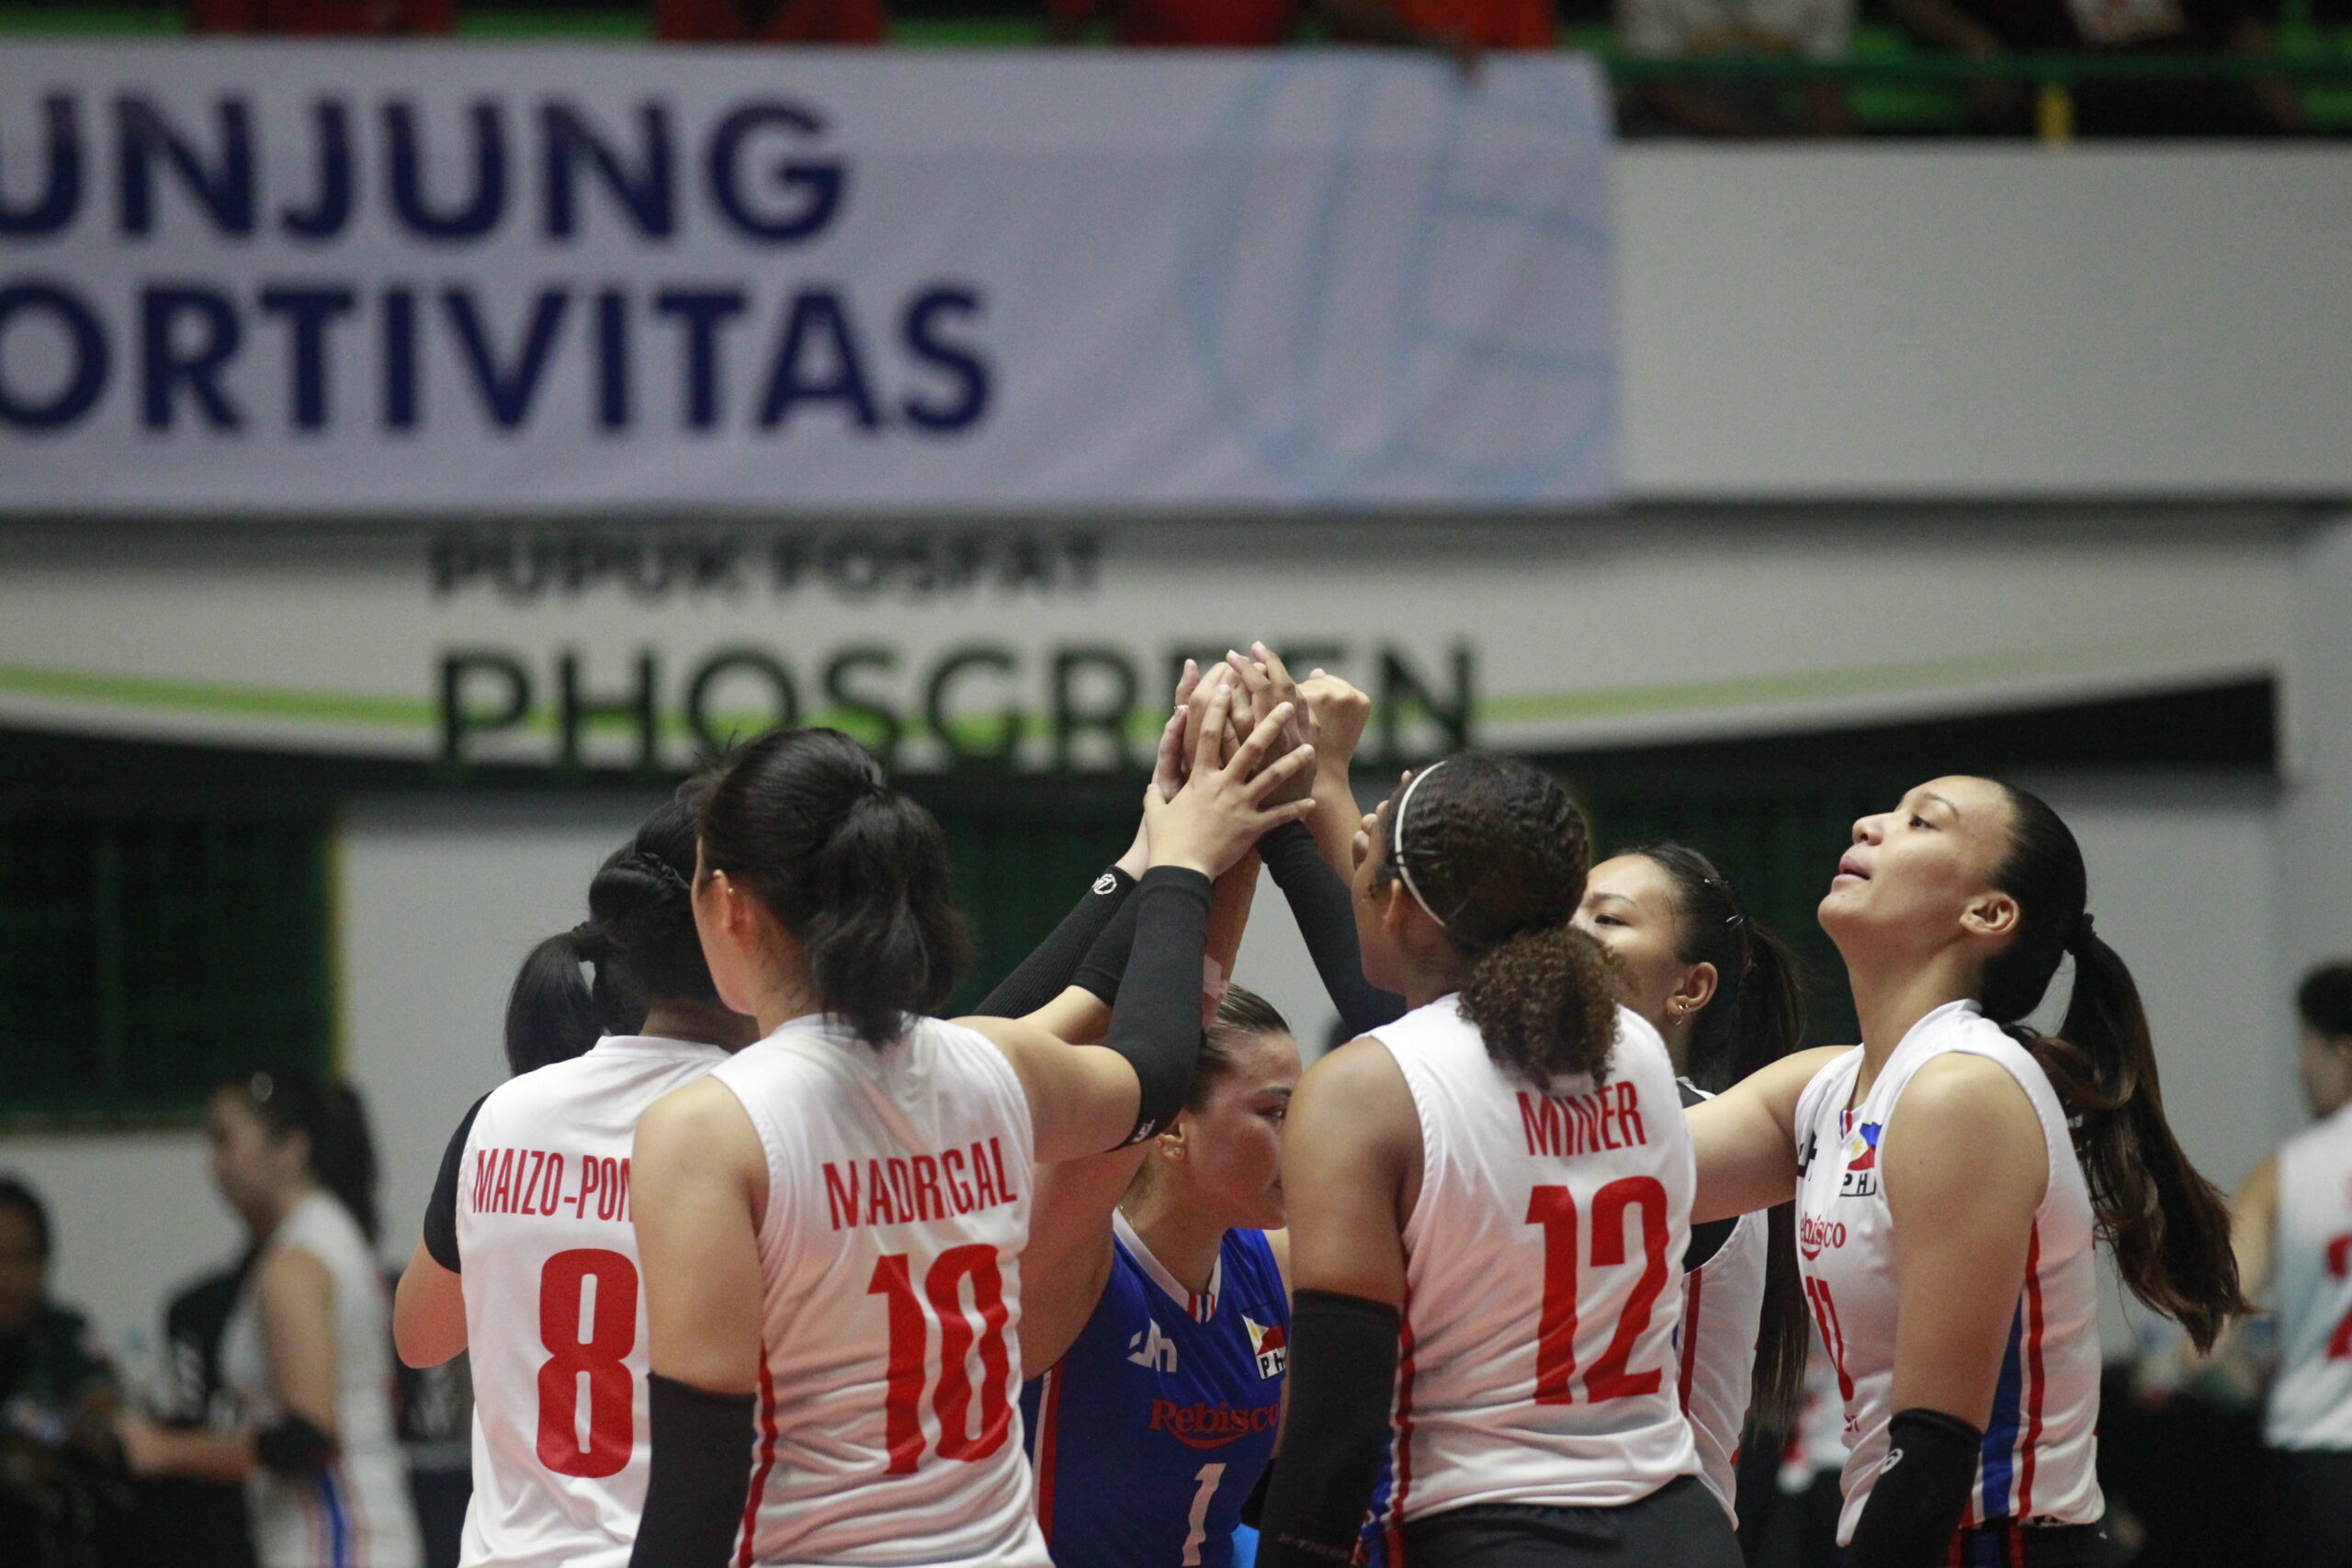 AVC Challenge Cup PH suffers quick loss to Iran, drops to battle for